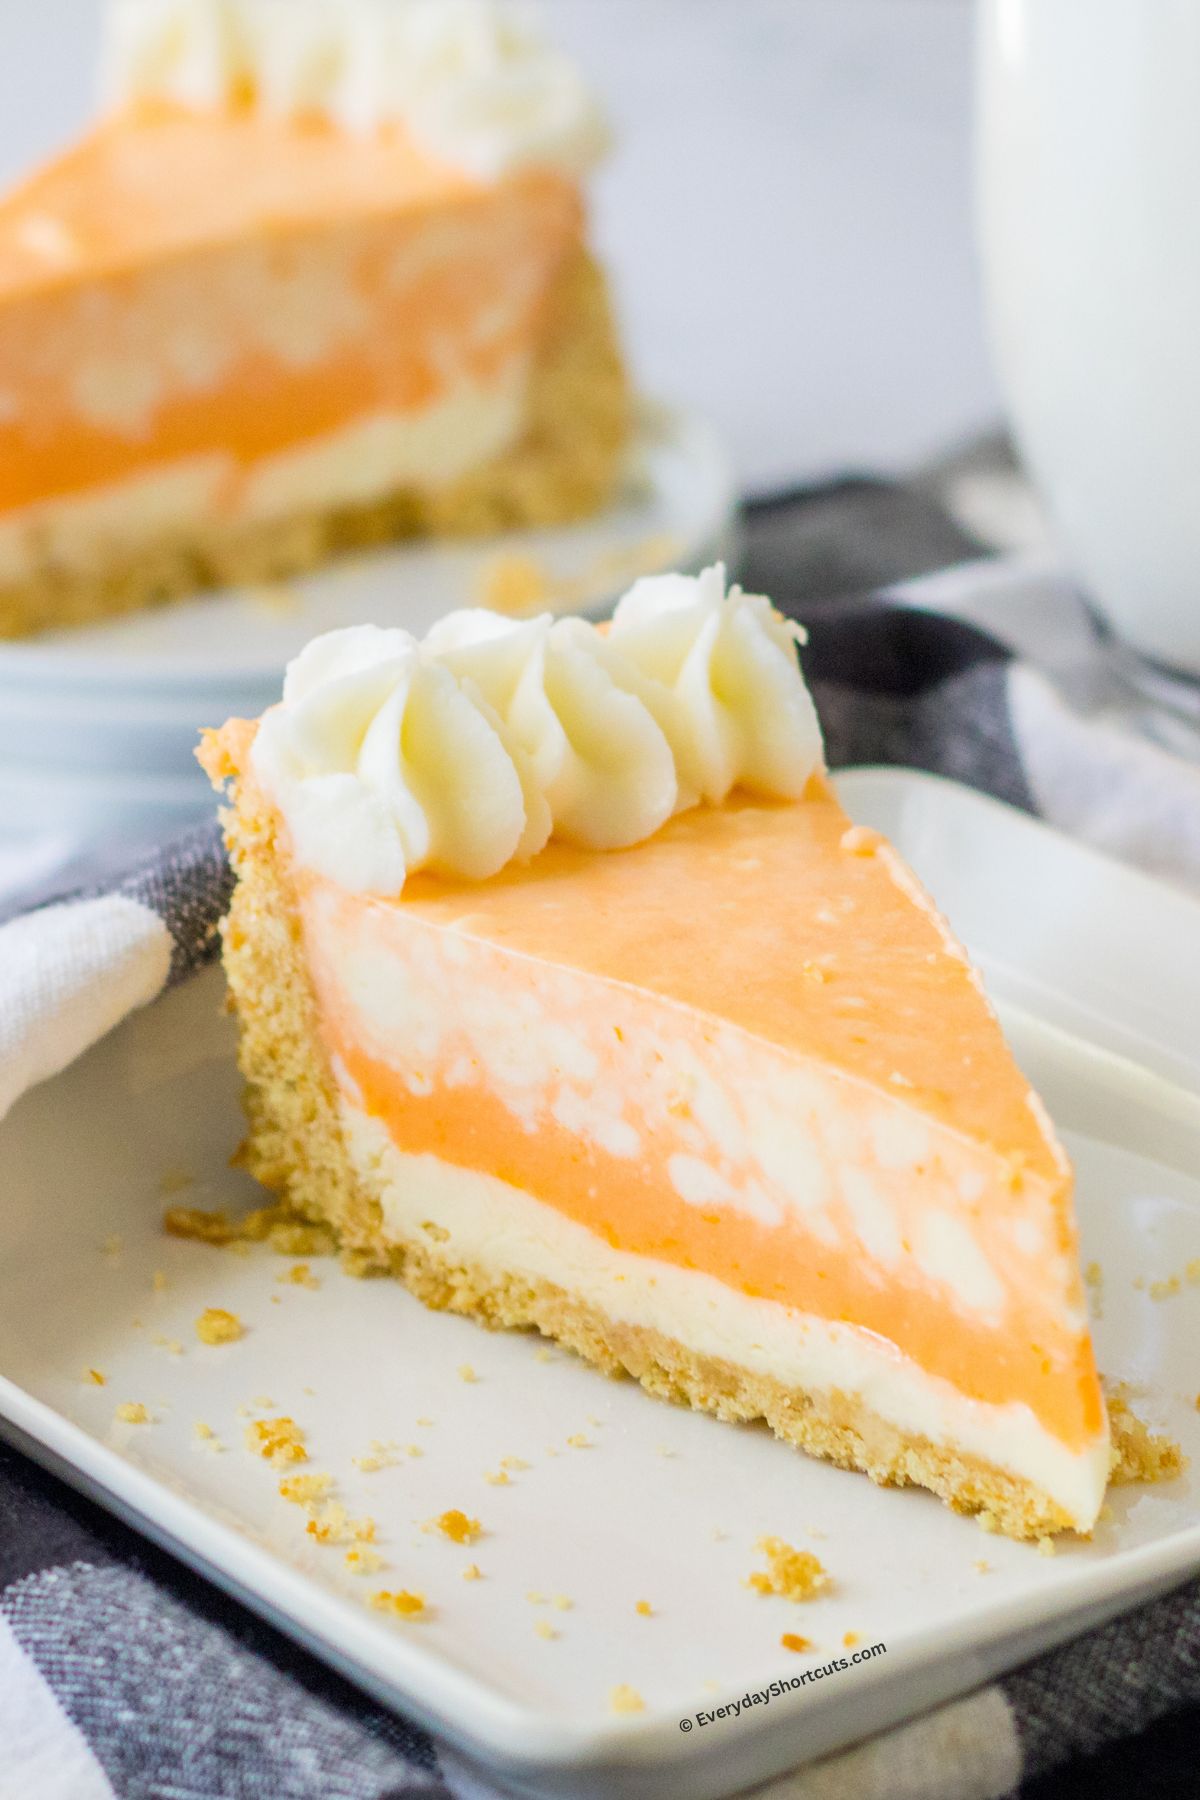 orange and vanilla flavored cheesecake with wafer crust o a plate